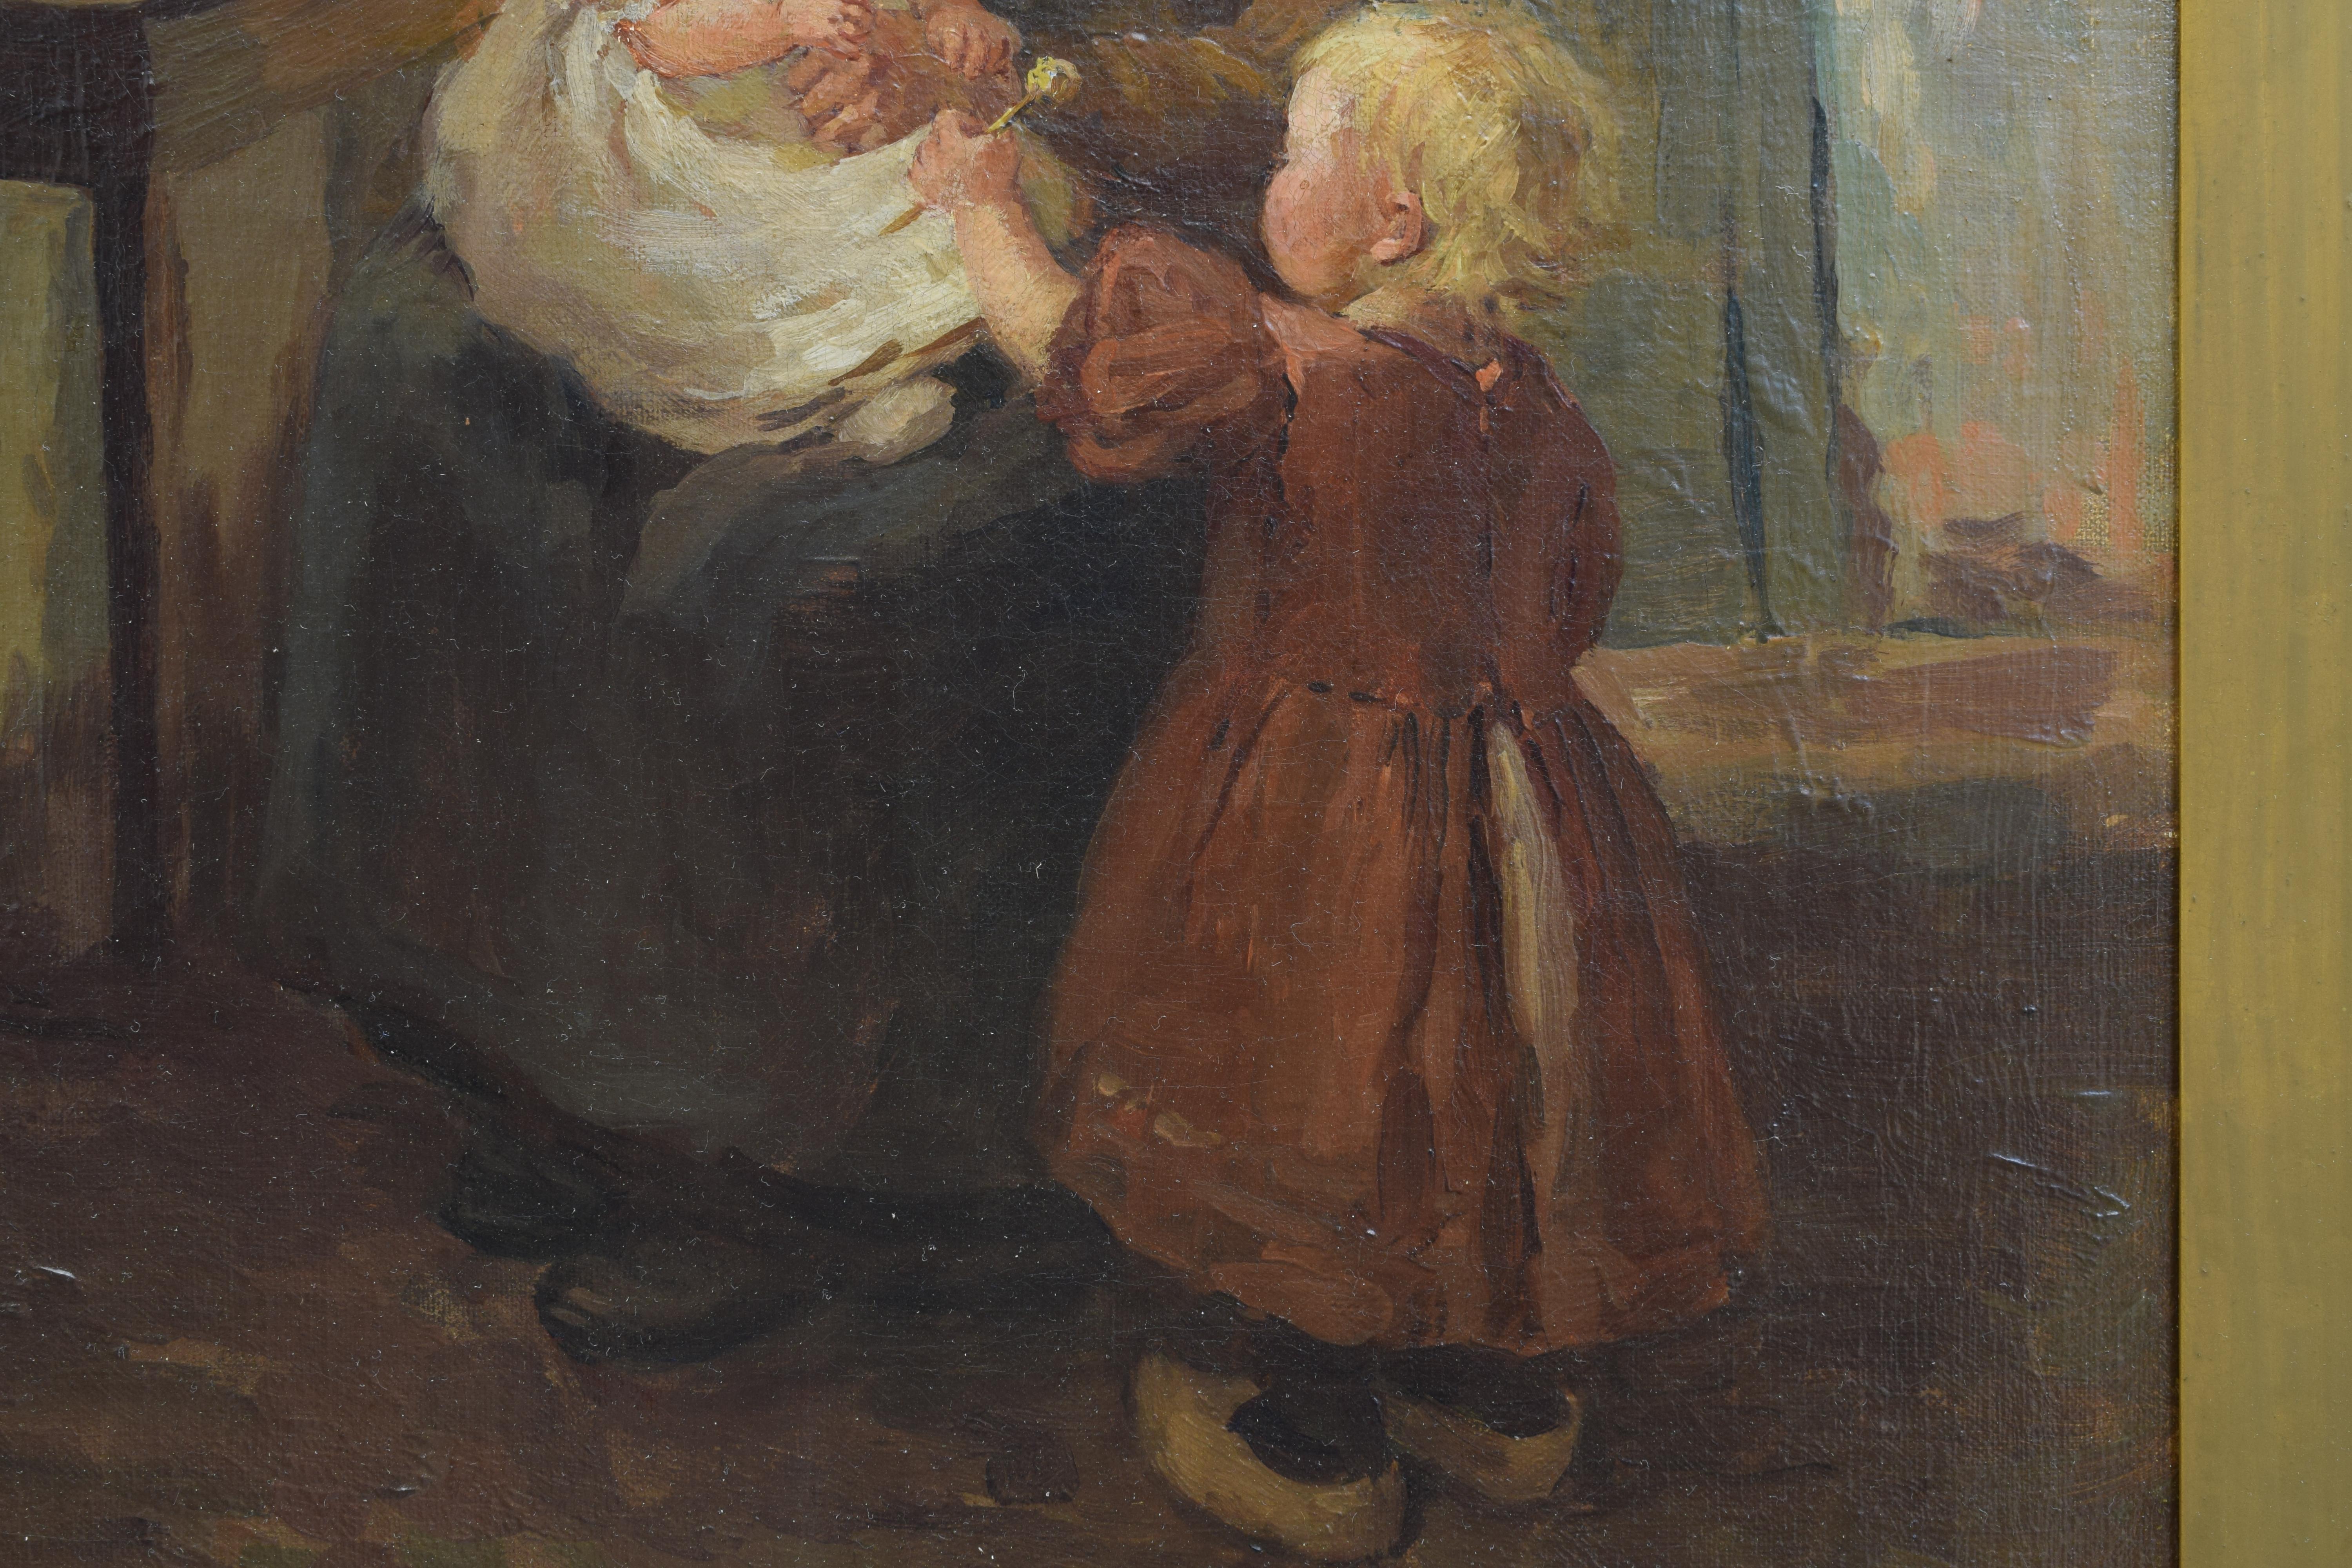 She was born in Detroit, Michigan (1872)-went abroad to Holland (1905-1911) and selected mainly Dutch children to paint. Marie also made cloth type dolls, did a diorama for the Children's Museum in Detroit. At one time she had a studio in downtown